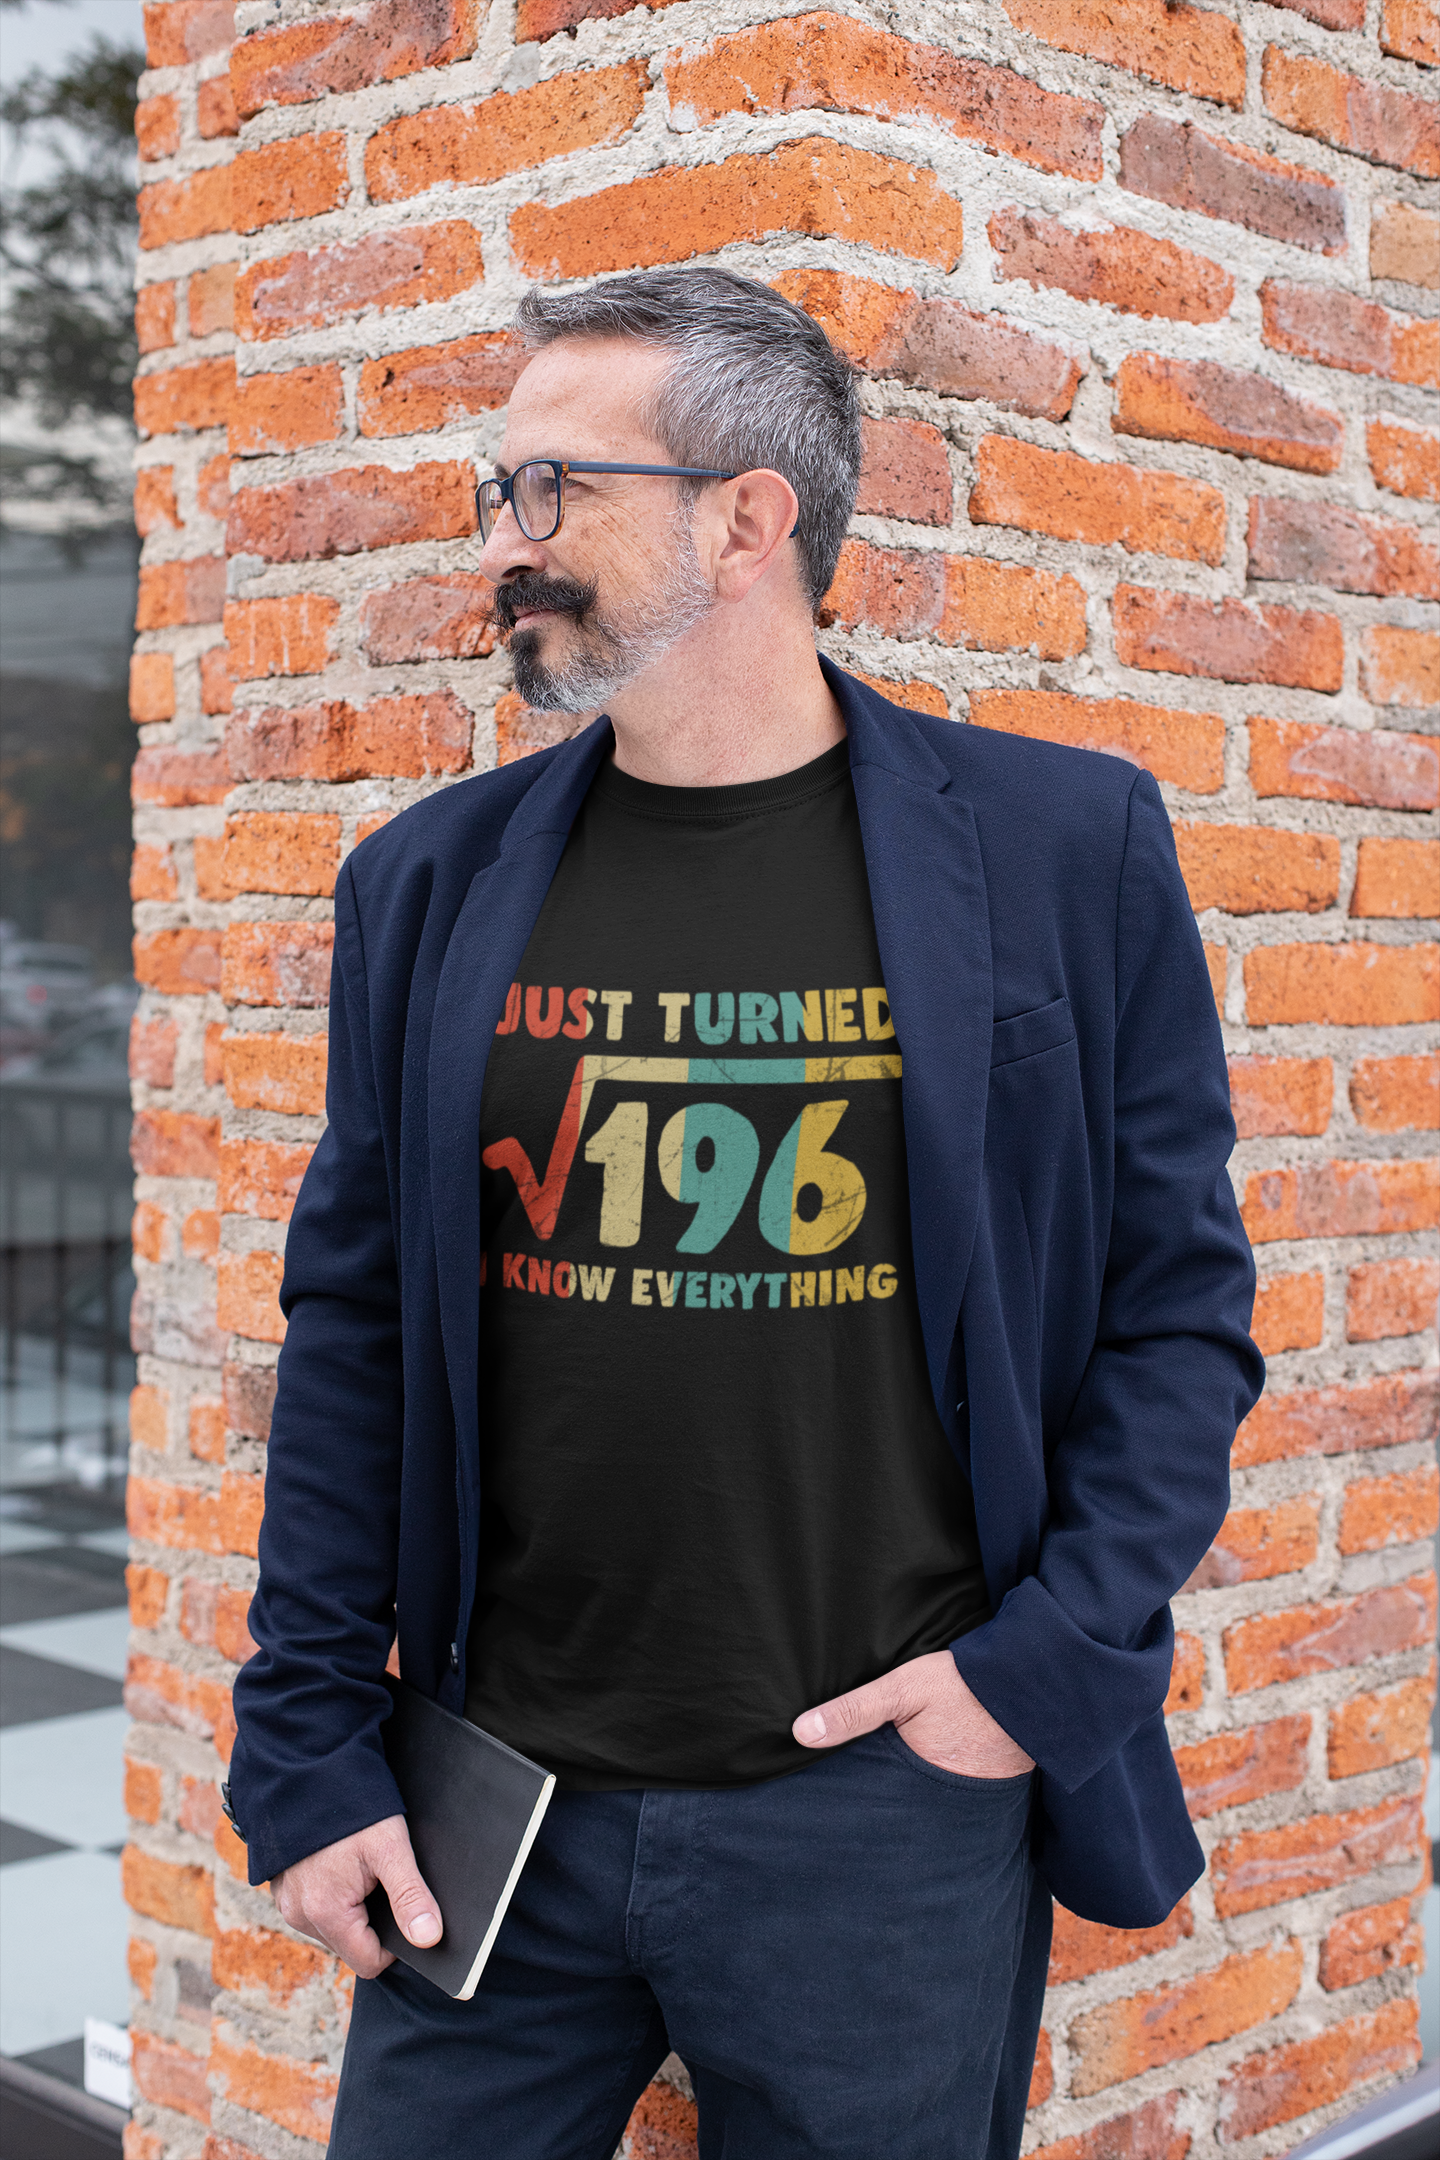 ULTRABASIC Men's Vintage T-Shirt Just Turned 14 - I Know Everything Funny Nerd Tee Shirt for 14th Birthday